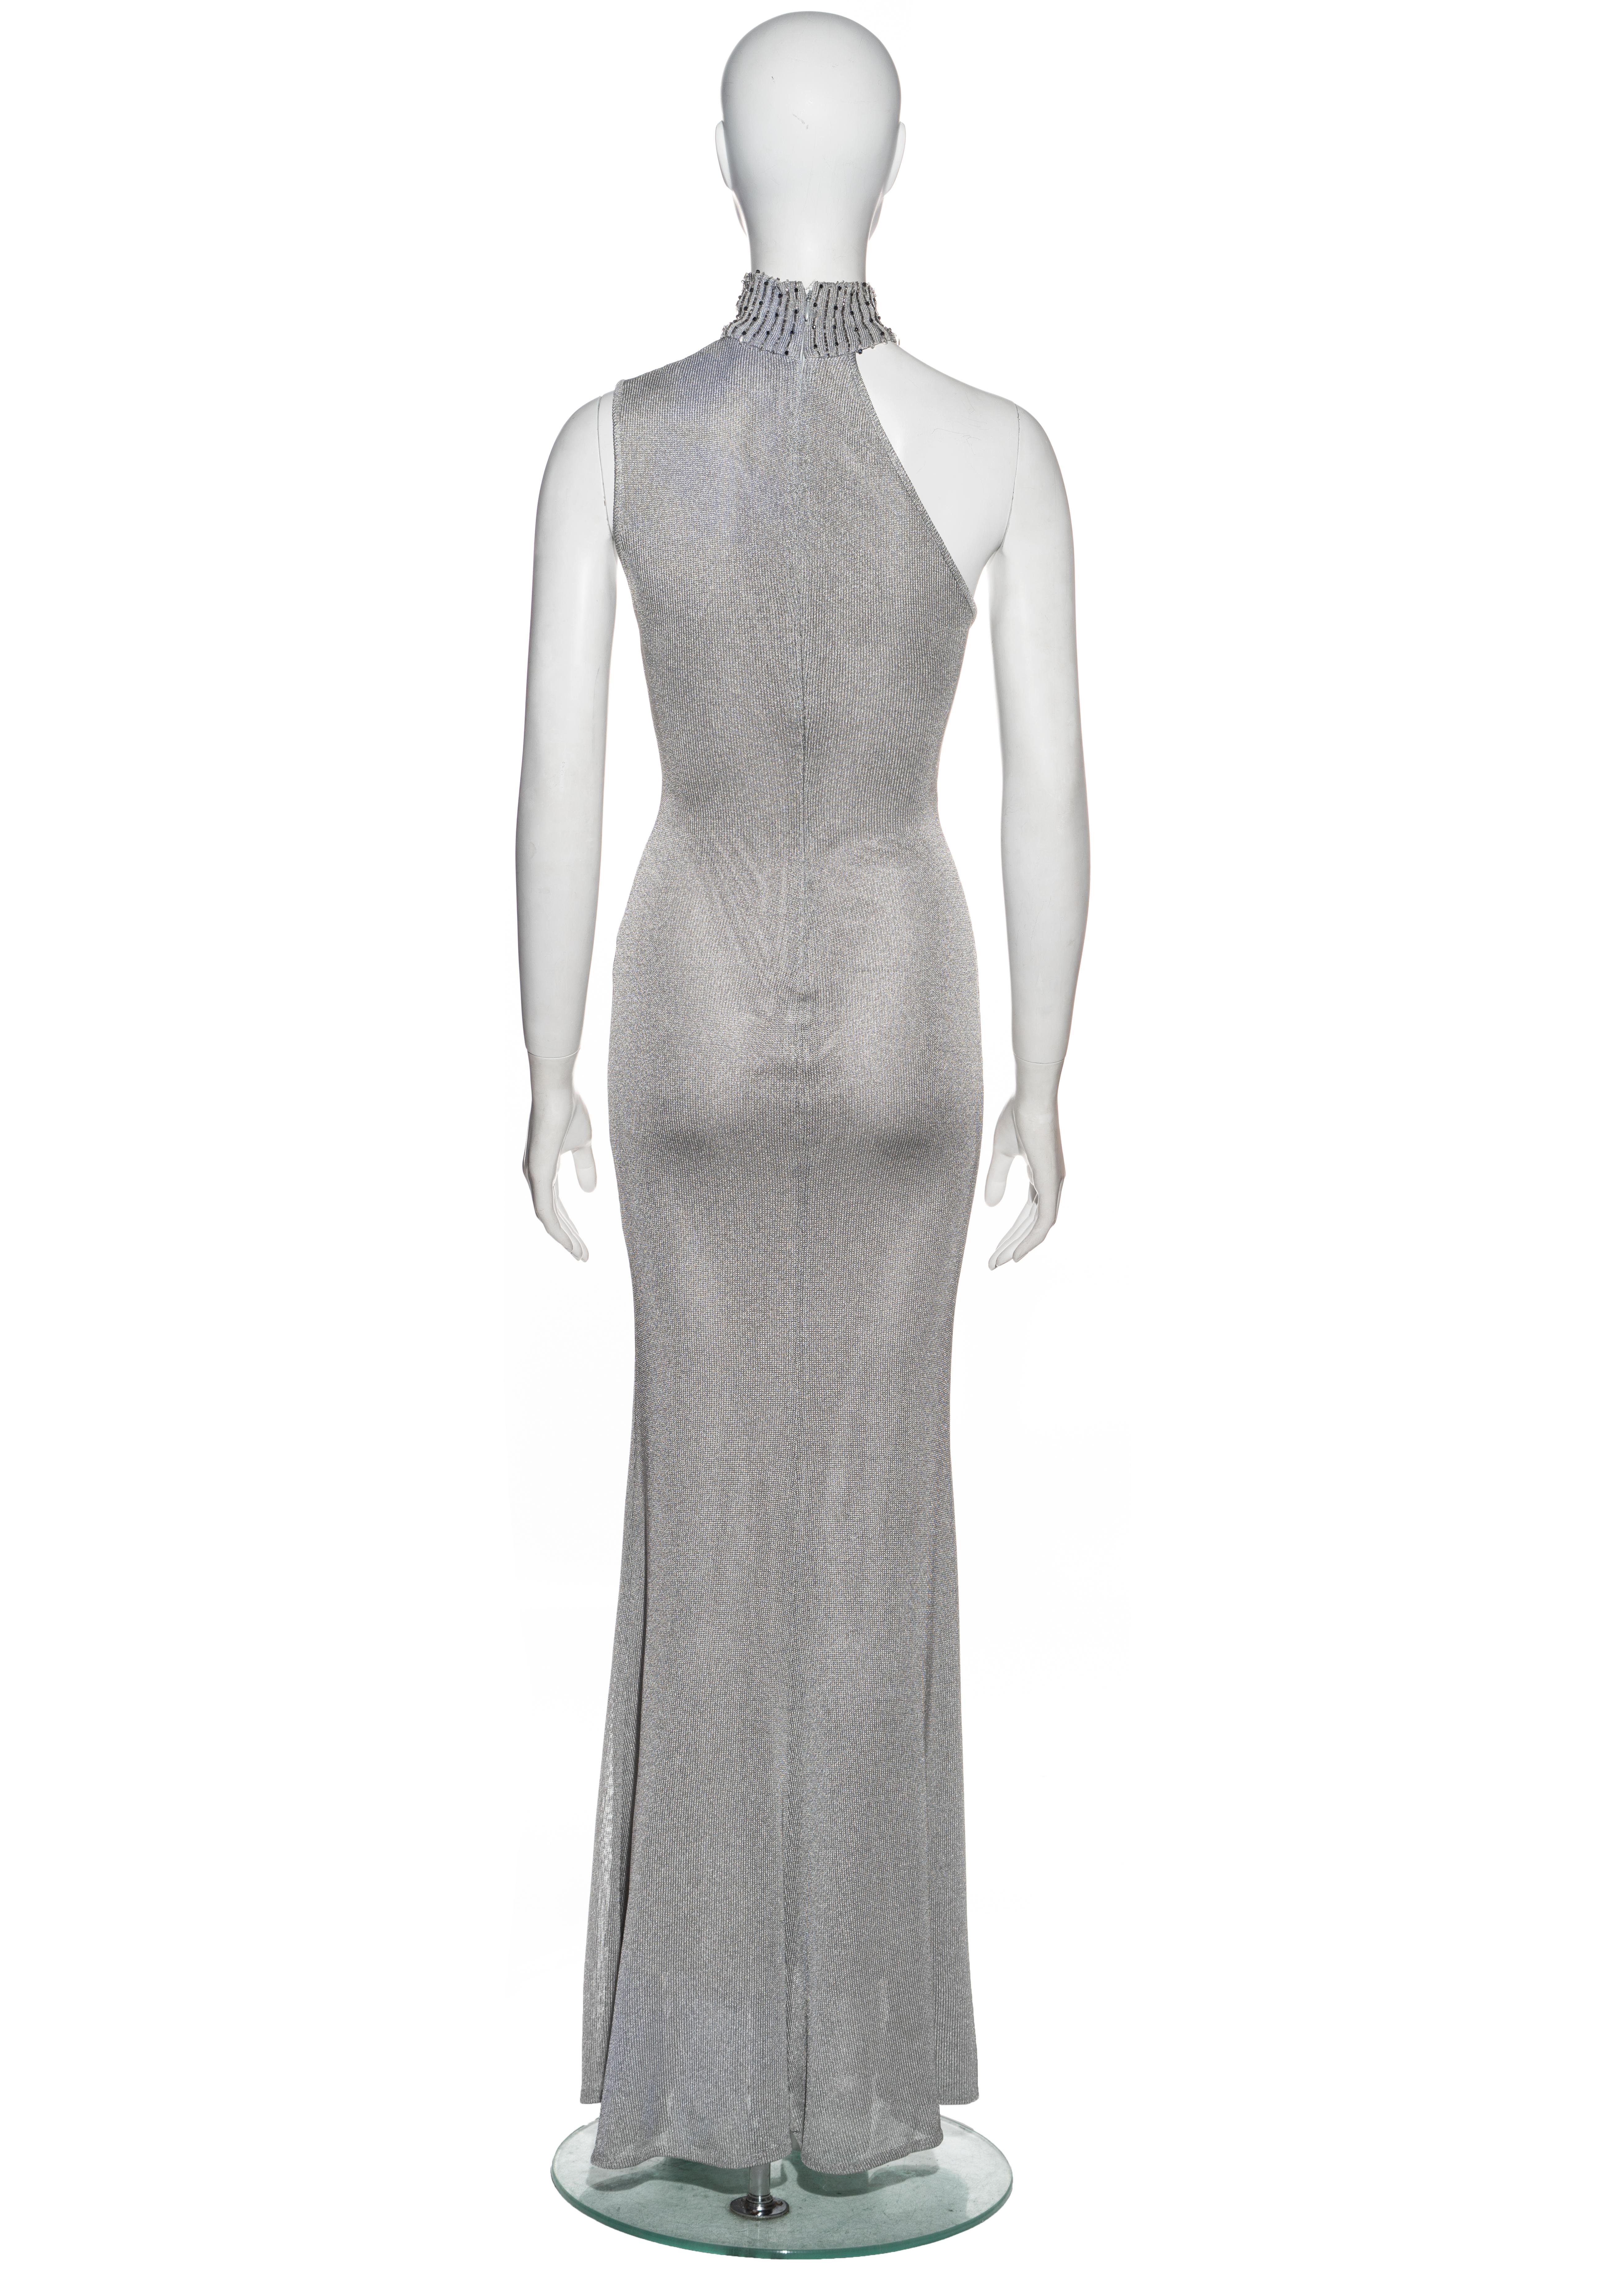 Gianni Versace silver knitted rayon evening dress, fw 1996 For Sale 2